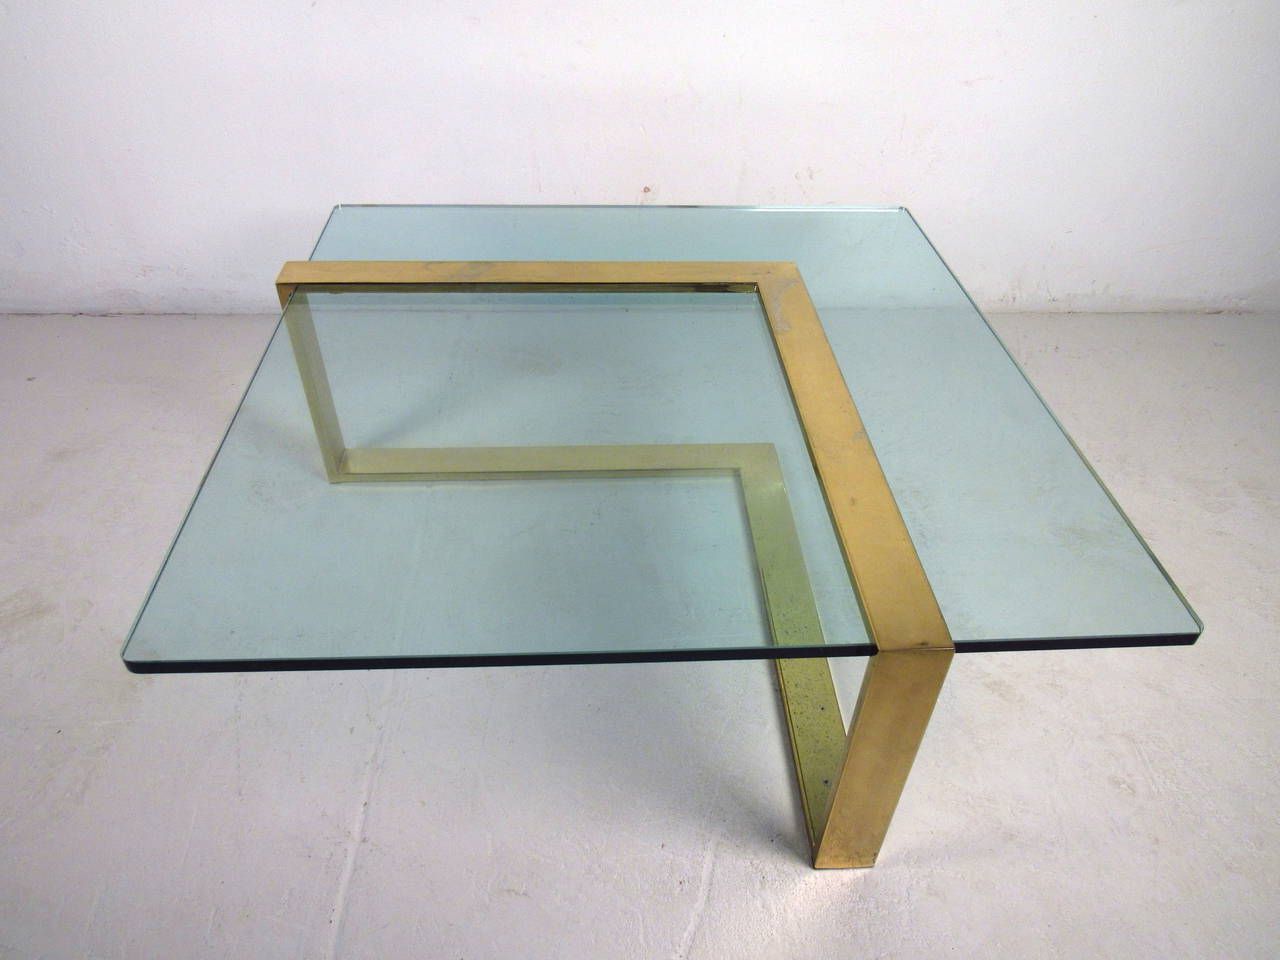 Famous L Shaped Coffee Tables In Brass L Shape Coffee Table With Glass Top At 1stdibs (Gallery 6 of 20)